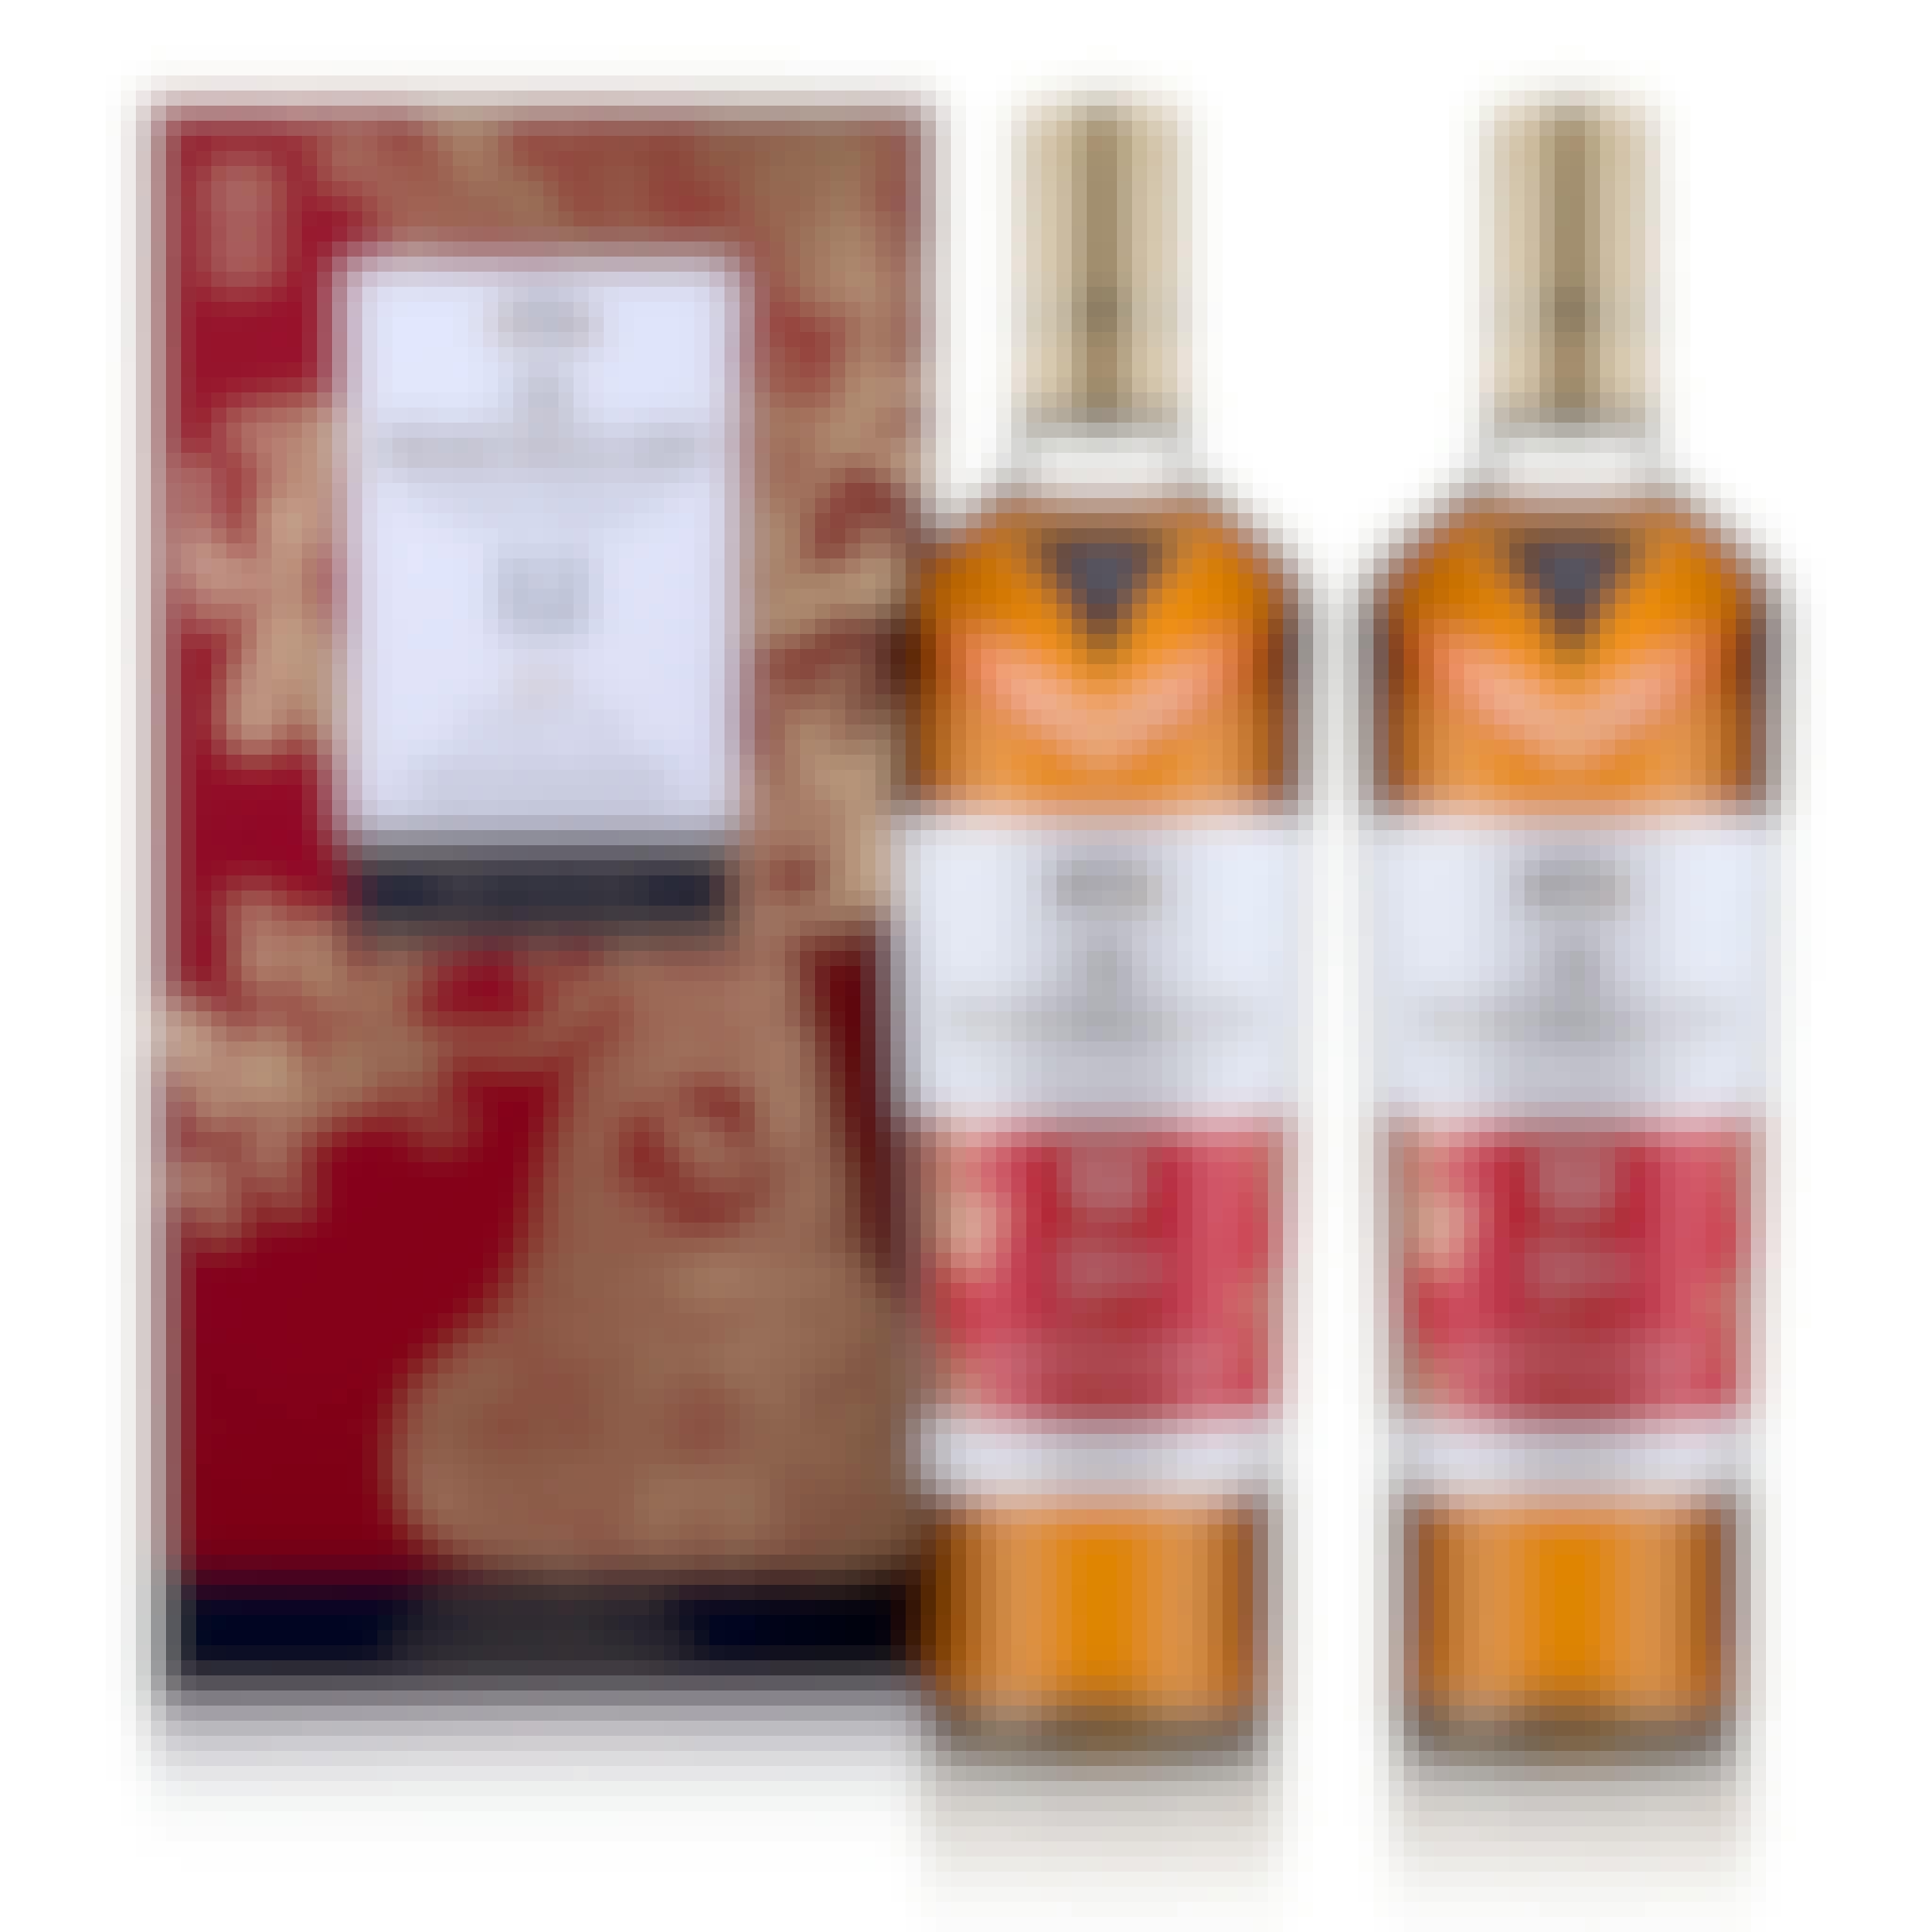 Macallan Limited Edition Year of the Pig Set Double cask 12 Year Old Single Malt Scotch 12 year old 750ml